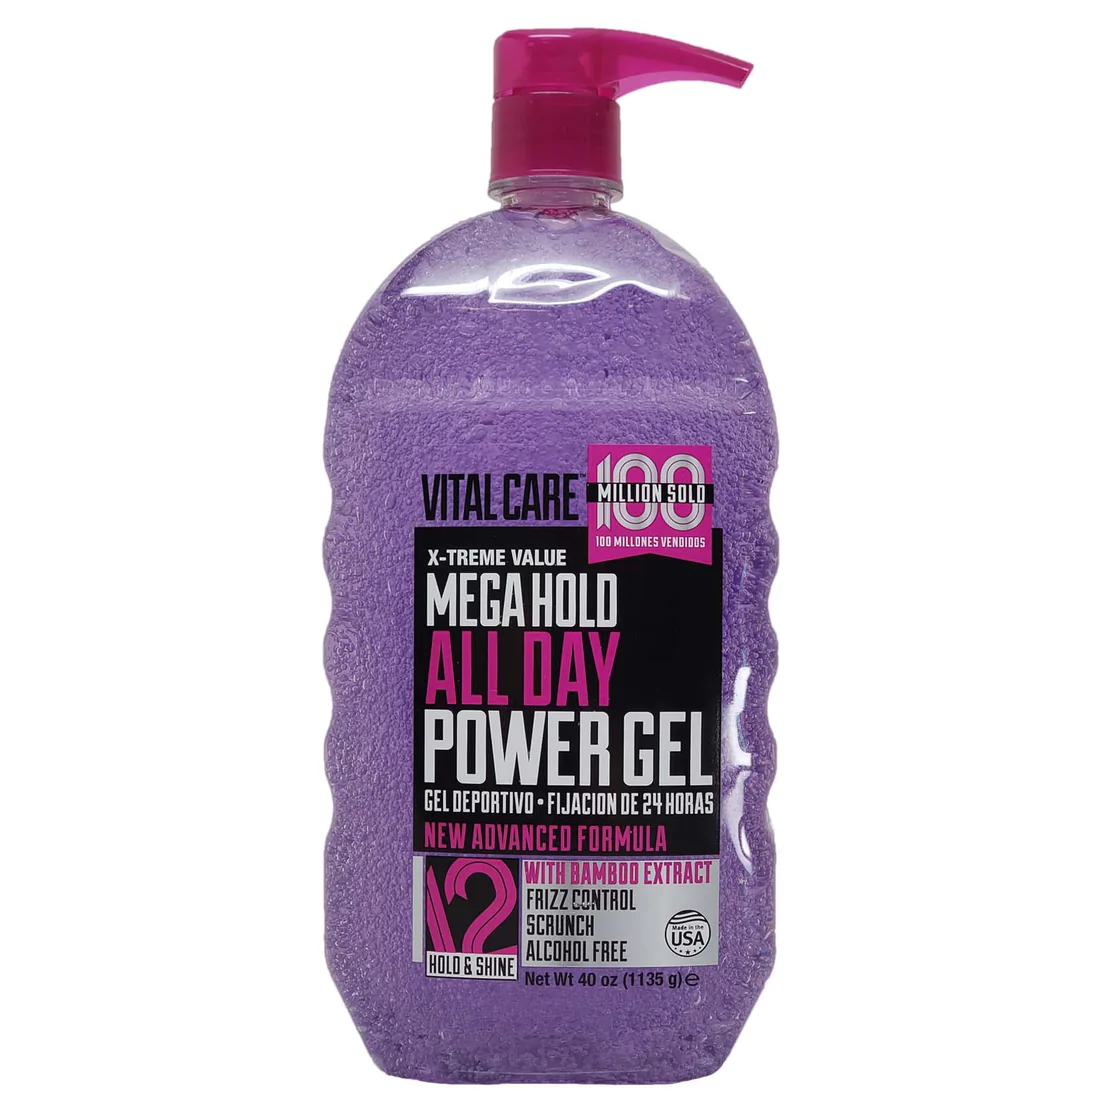 Image 0 of Vital Care Mega Hold All Day Power Gel with Pump Maximum control 40oz